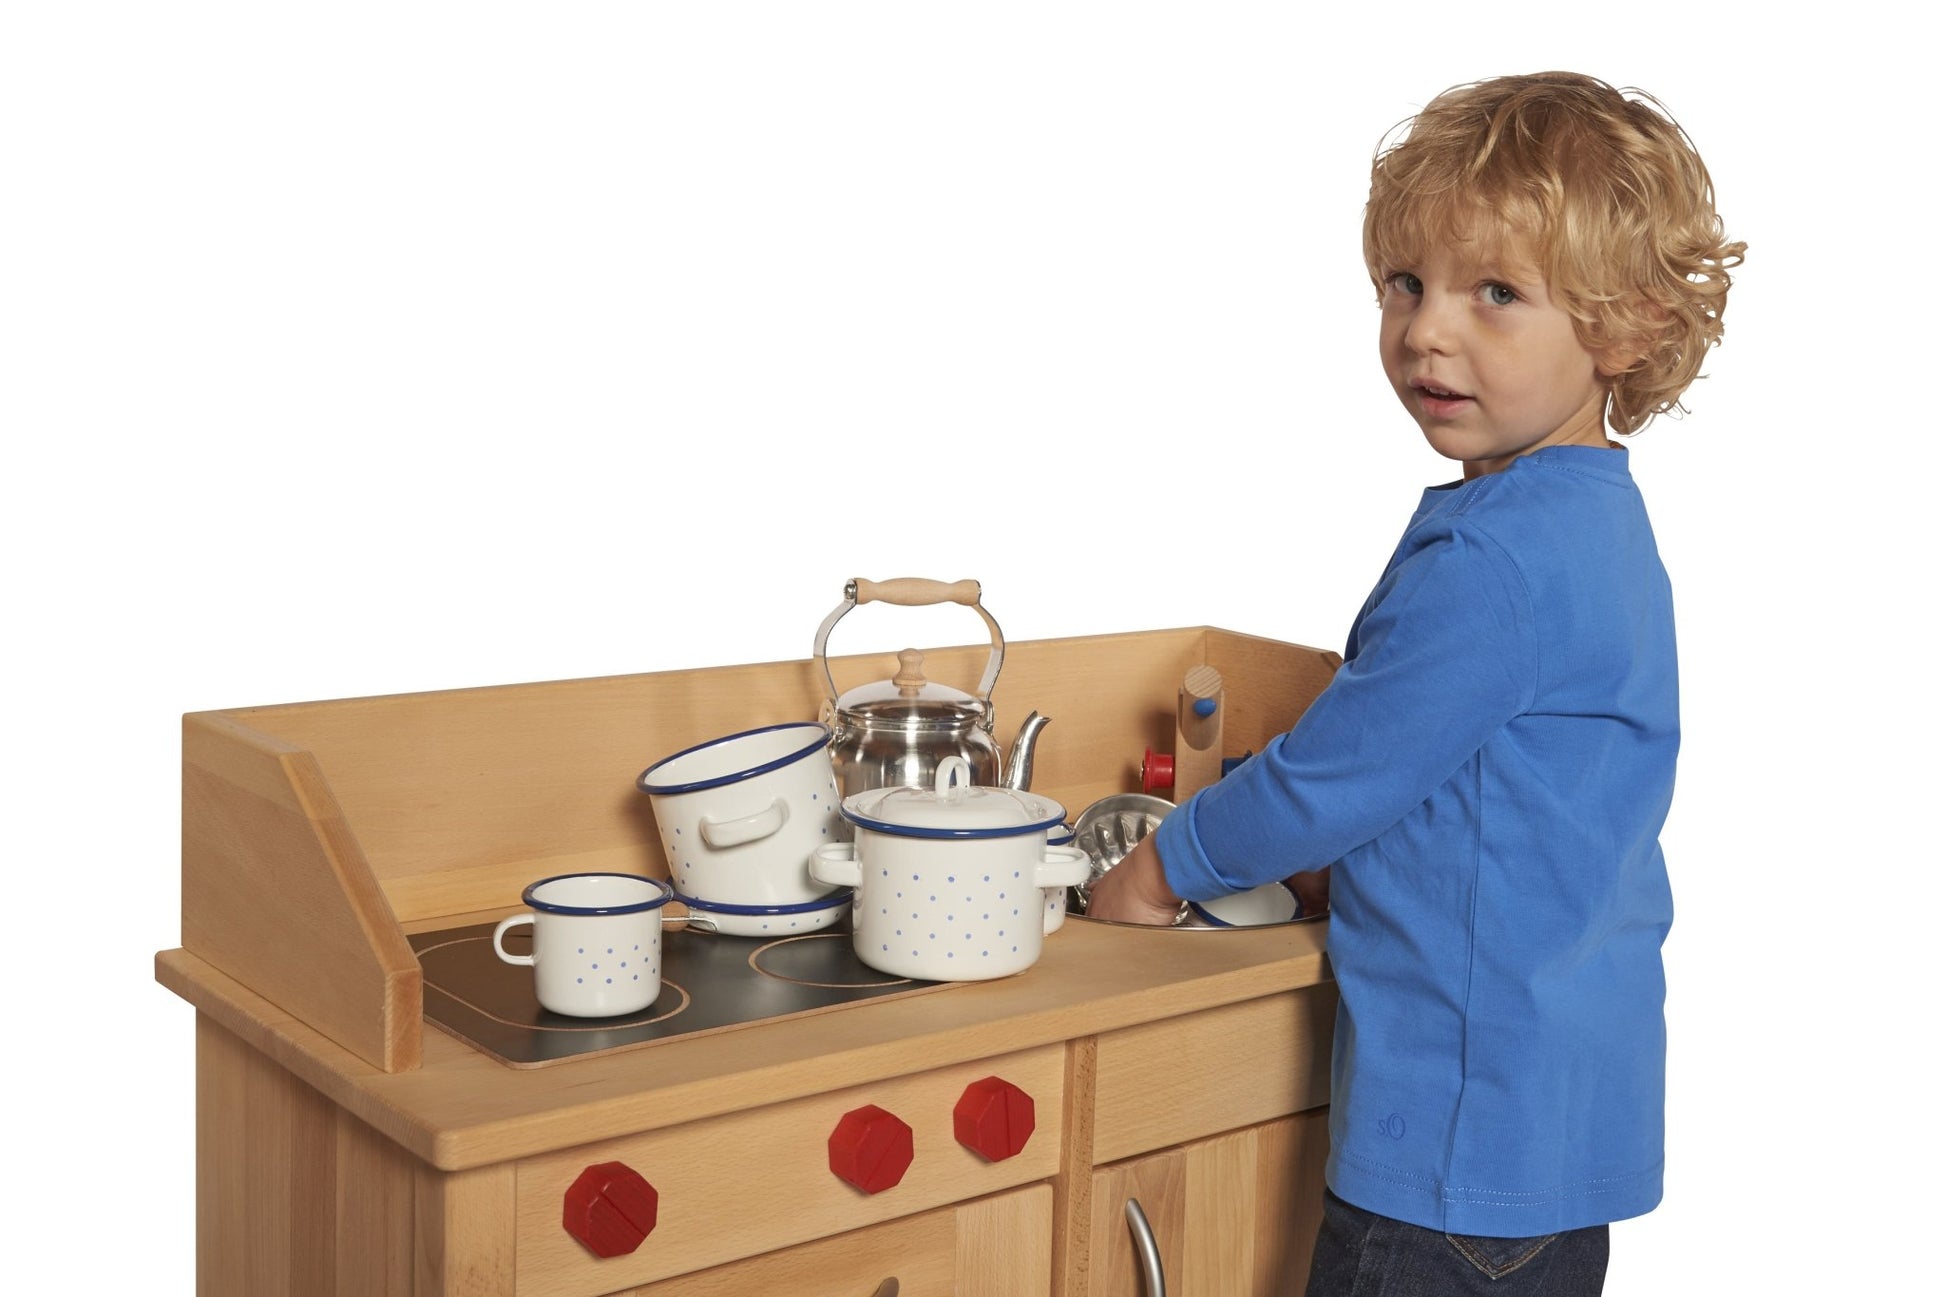 Gluckskafer Play Kitchen without Upper Structure – Wood Wood Toys